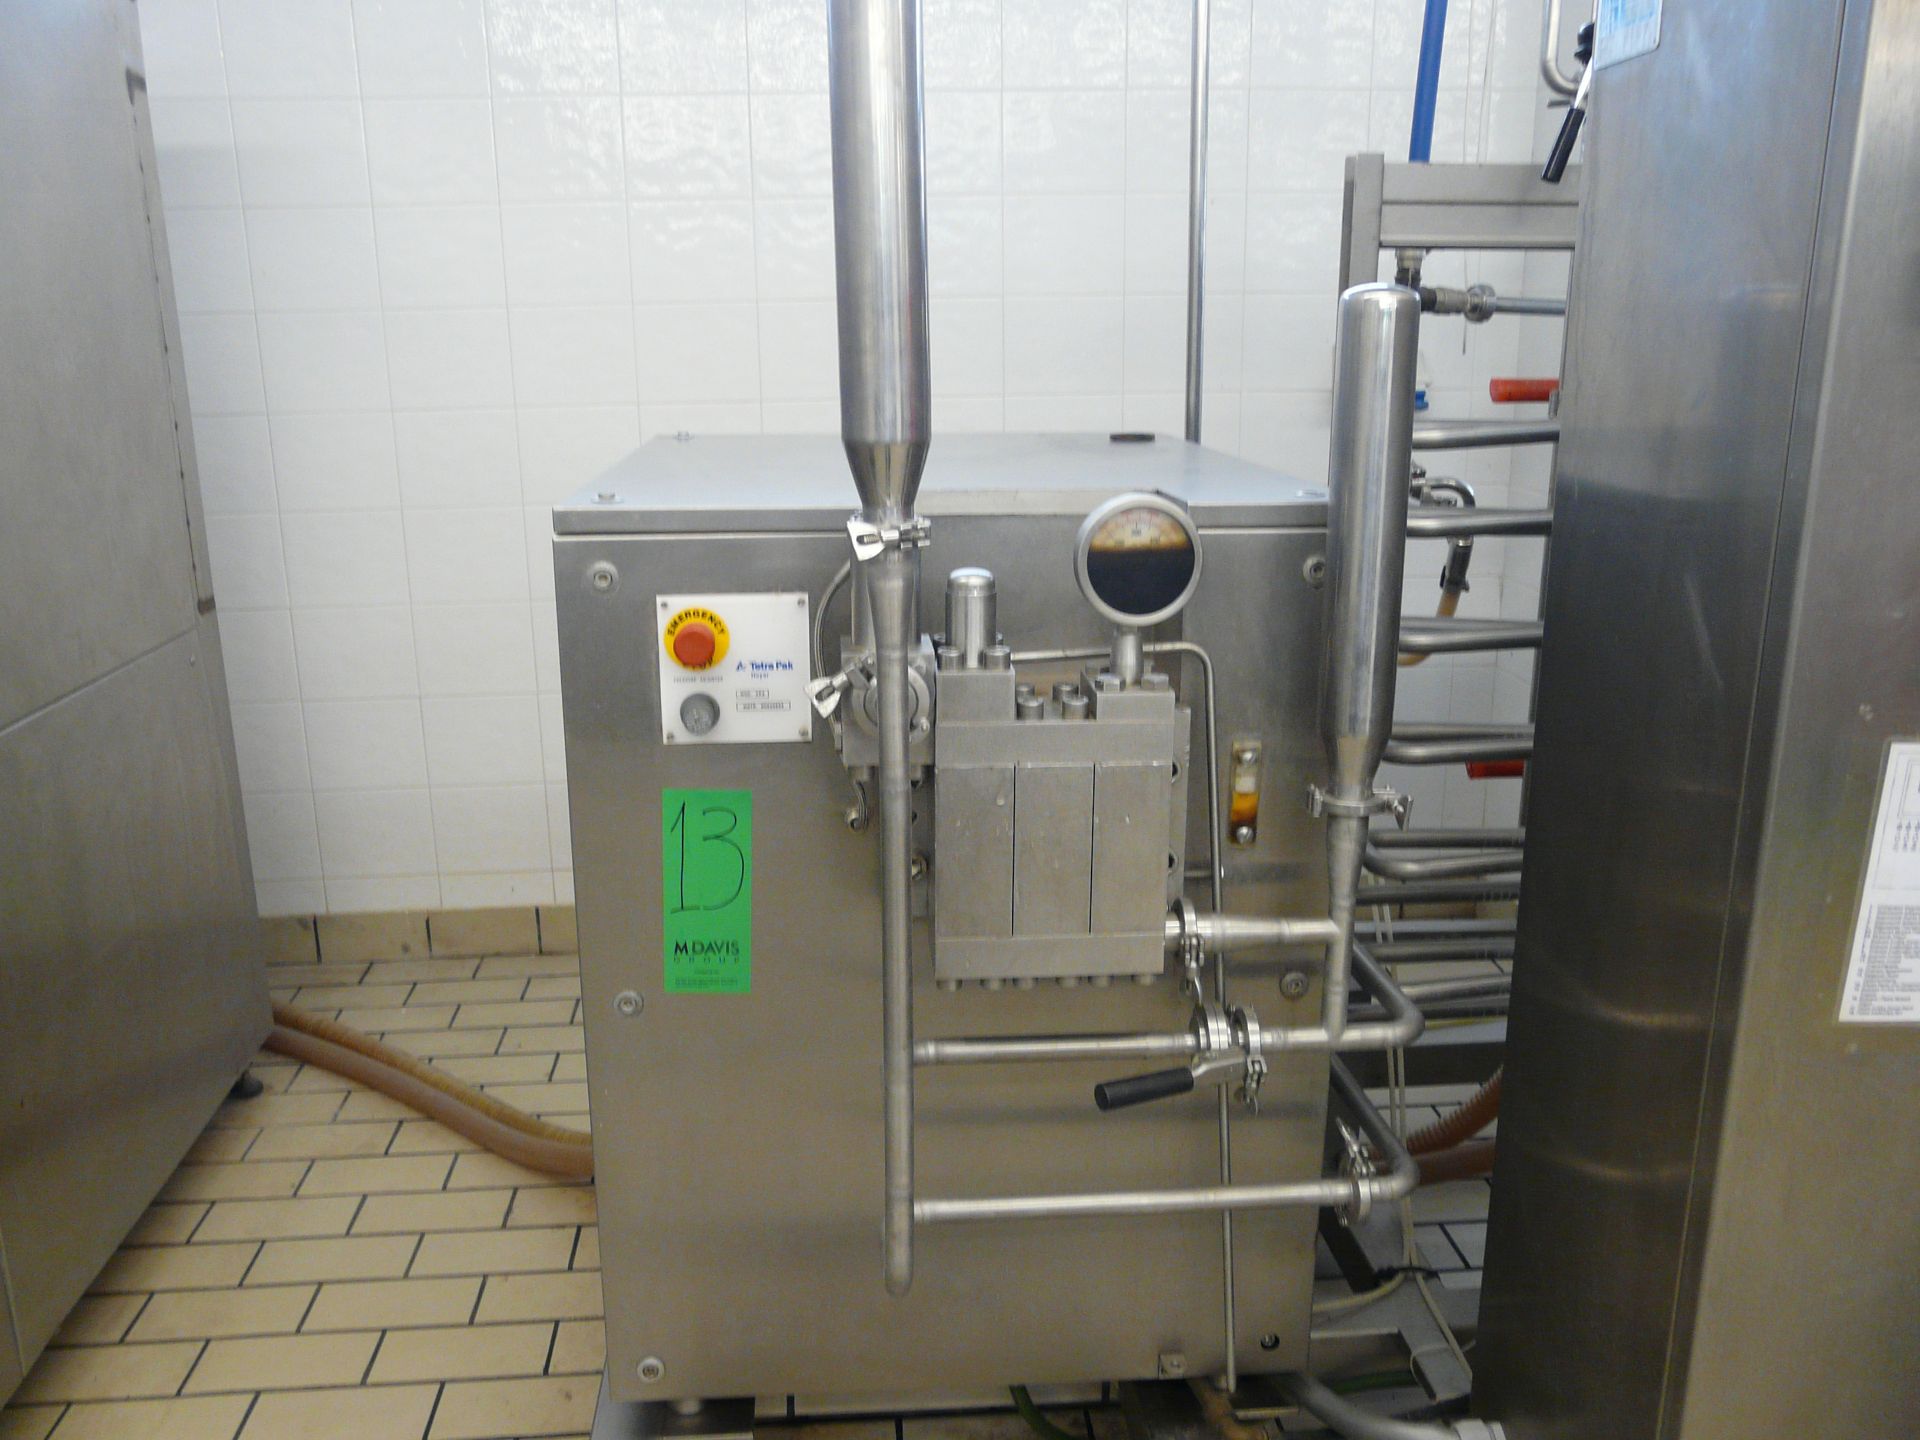 English: TETRA PAK HOYER HTST SYSTEM, 1200 Pasteurizer for Ice Cream, Contains 2 x Tanks with - Image 17 of 45